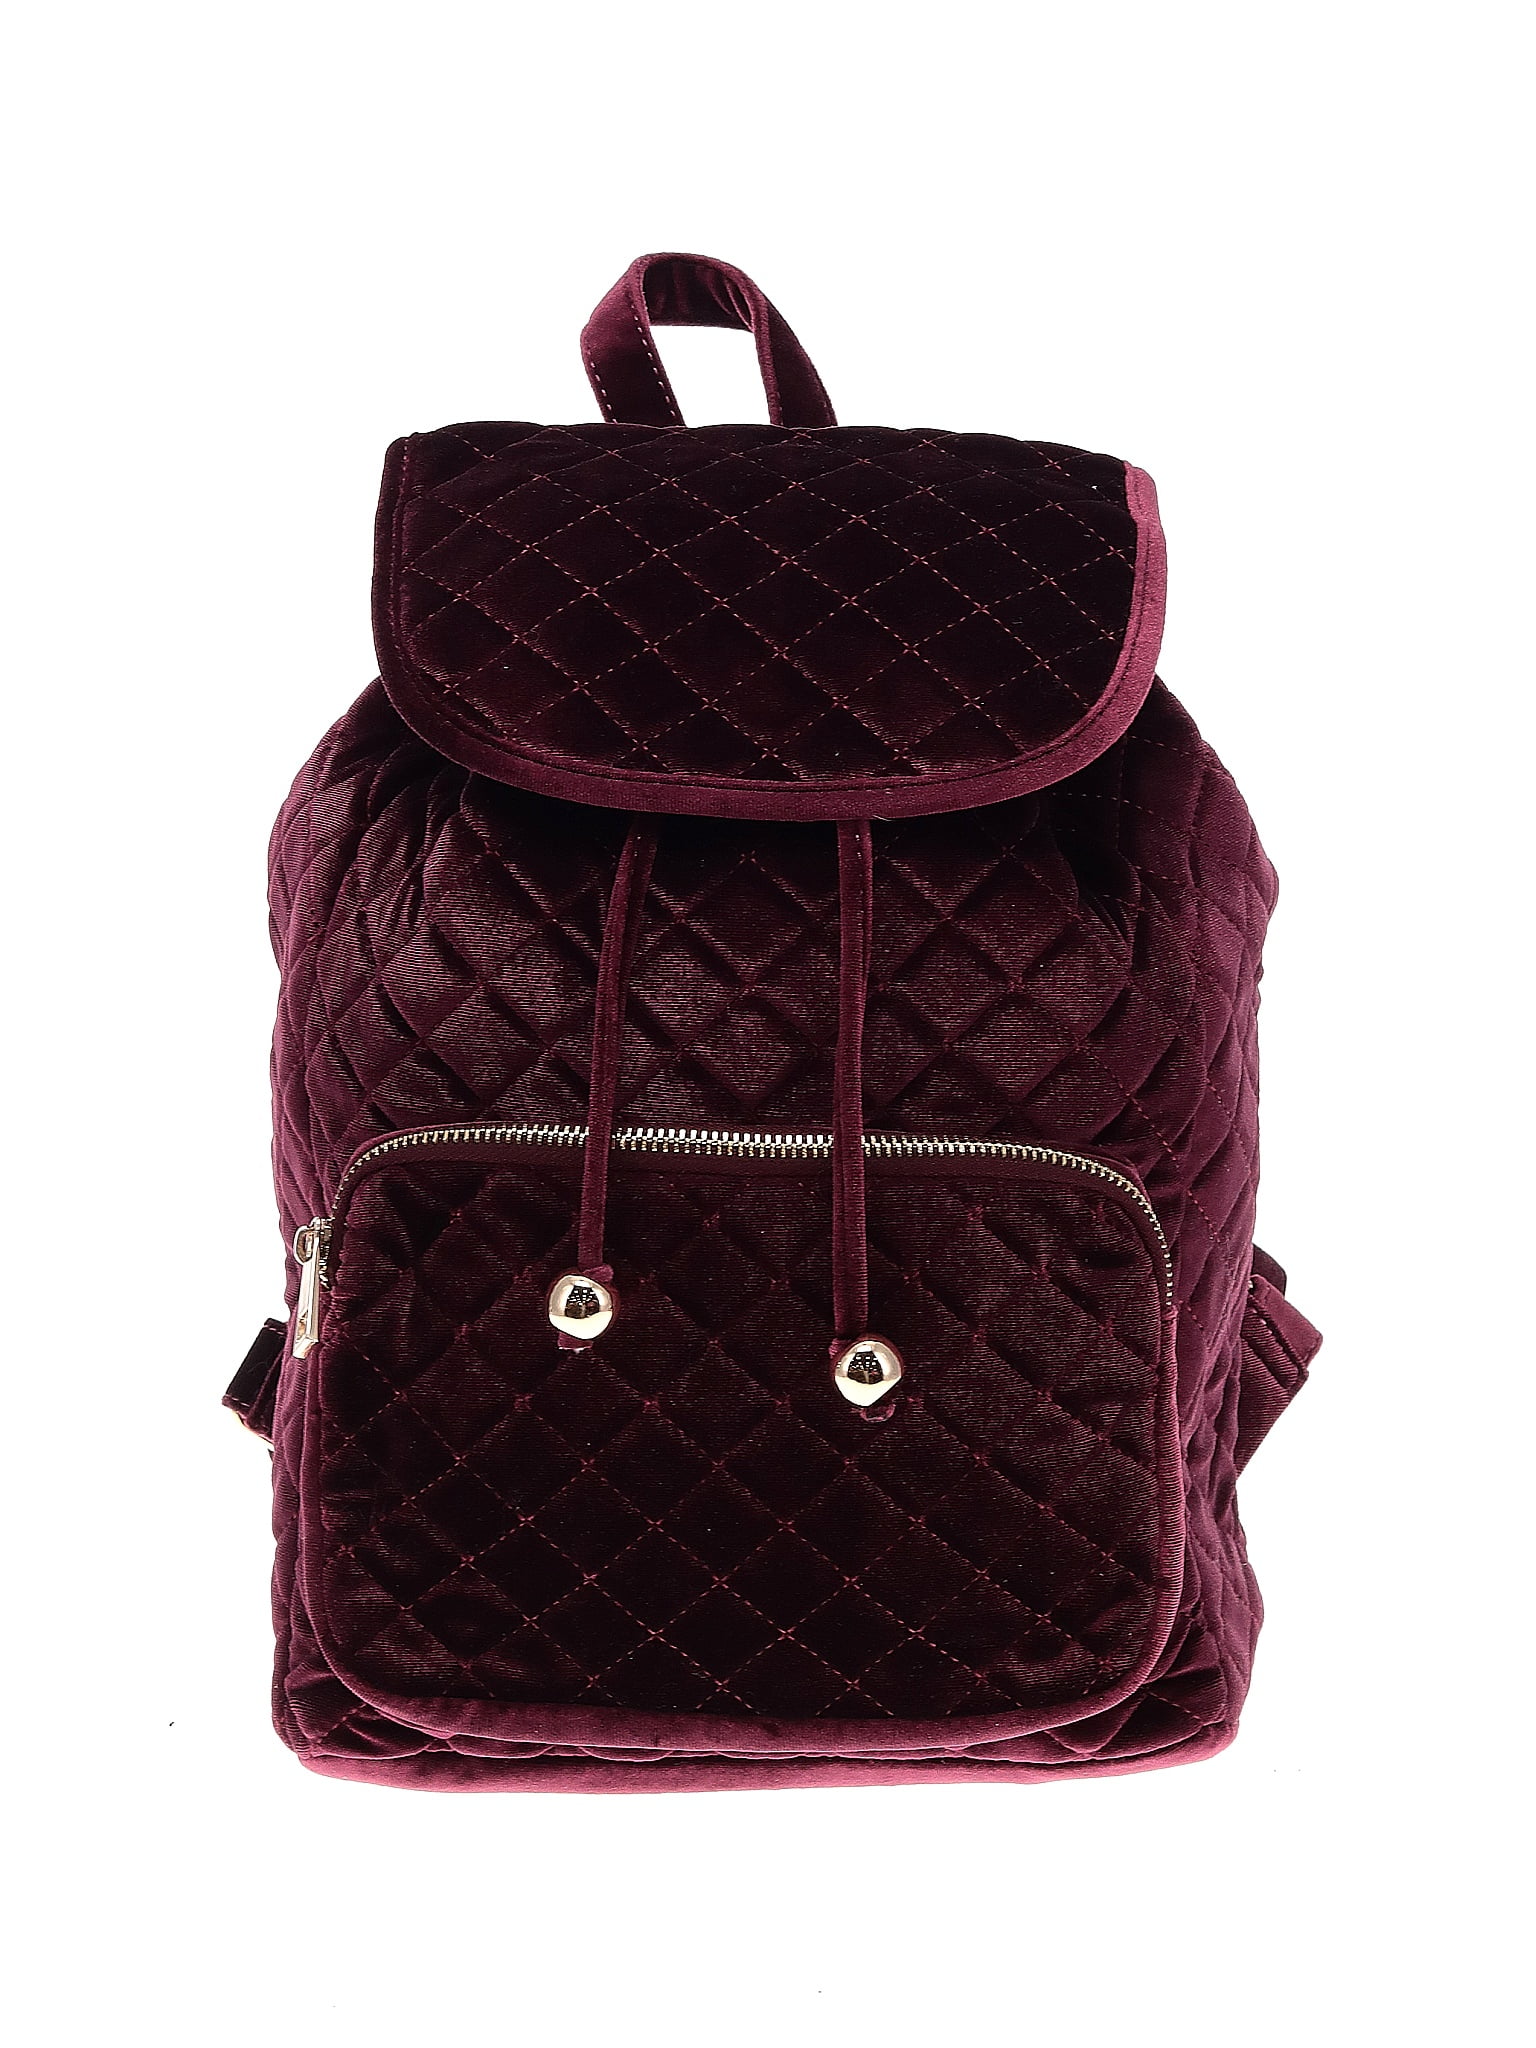 Call It Spring, Bags, Call It Spring Pink Mini Backpack Purse